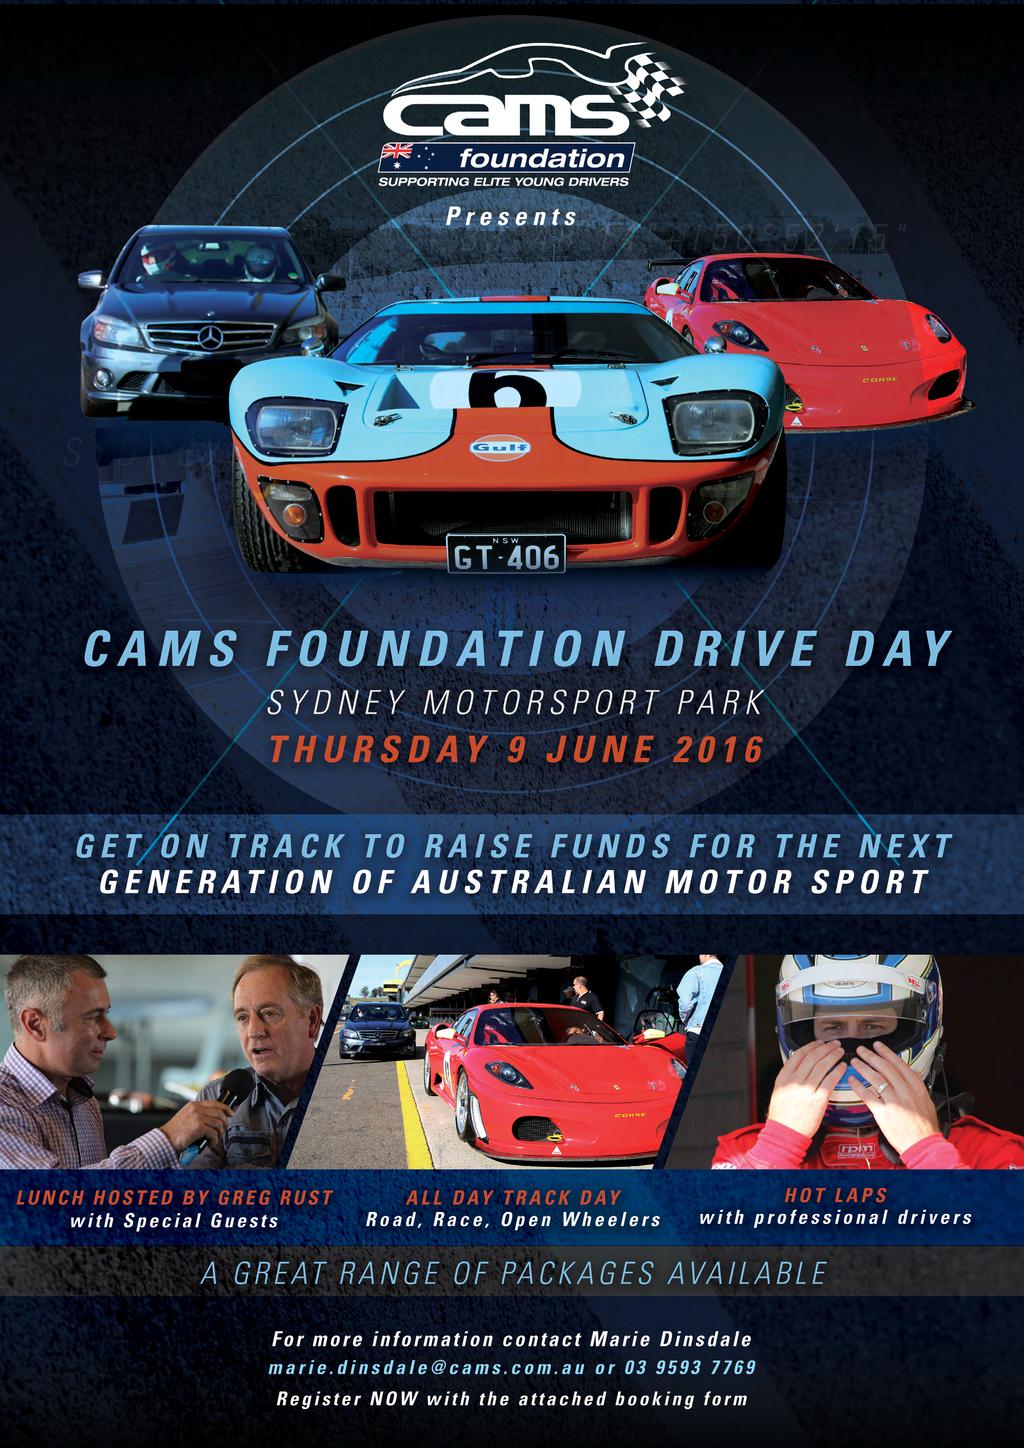 CAMS Foundation Drive Day www.cams.com.